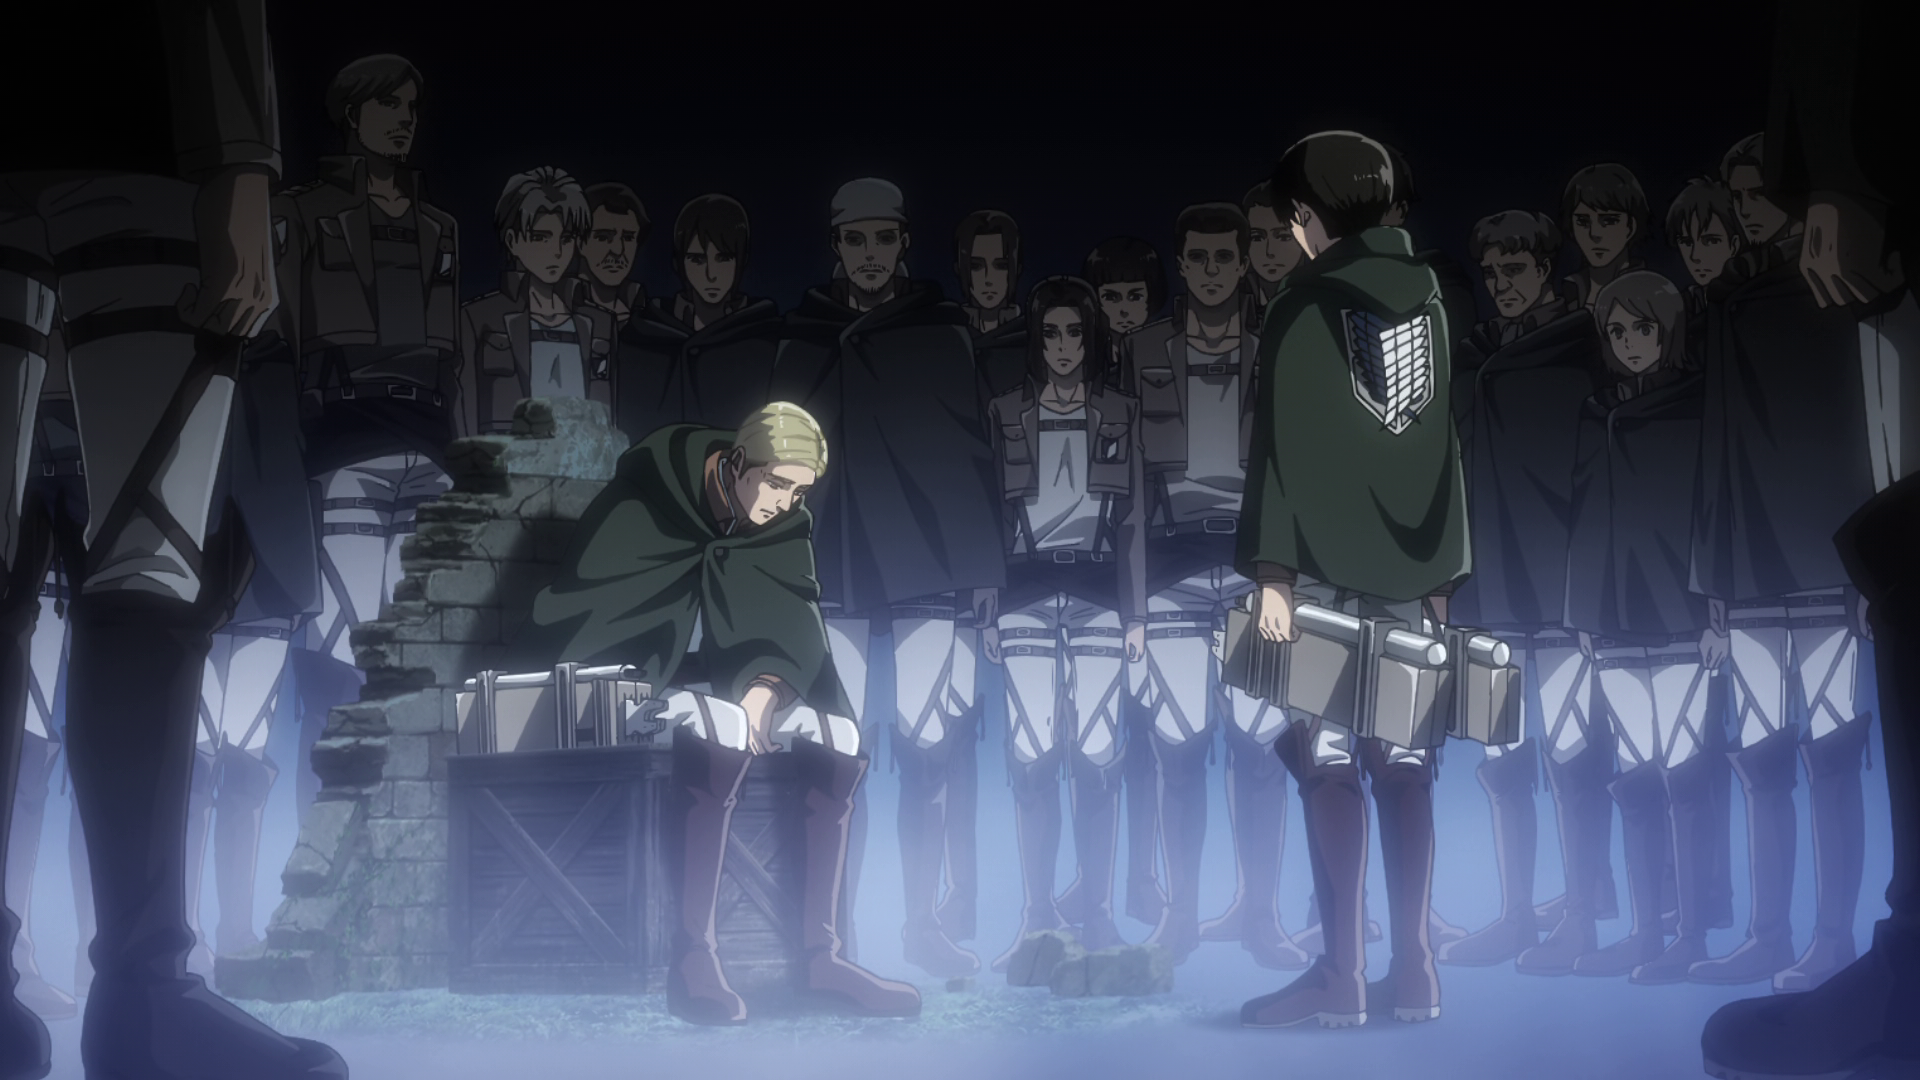 We'd fight each other again': 'Attack on Titan' final episode